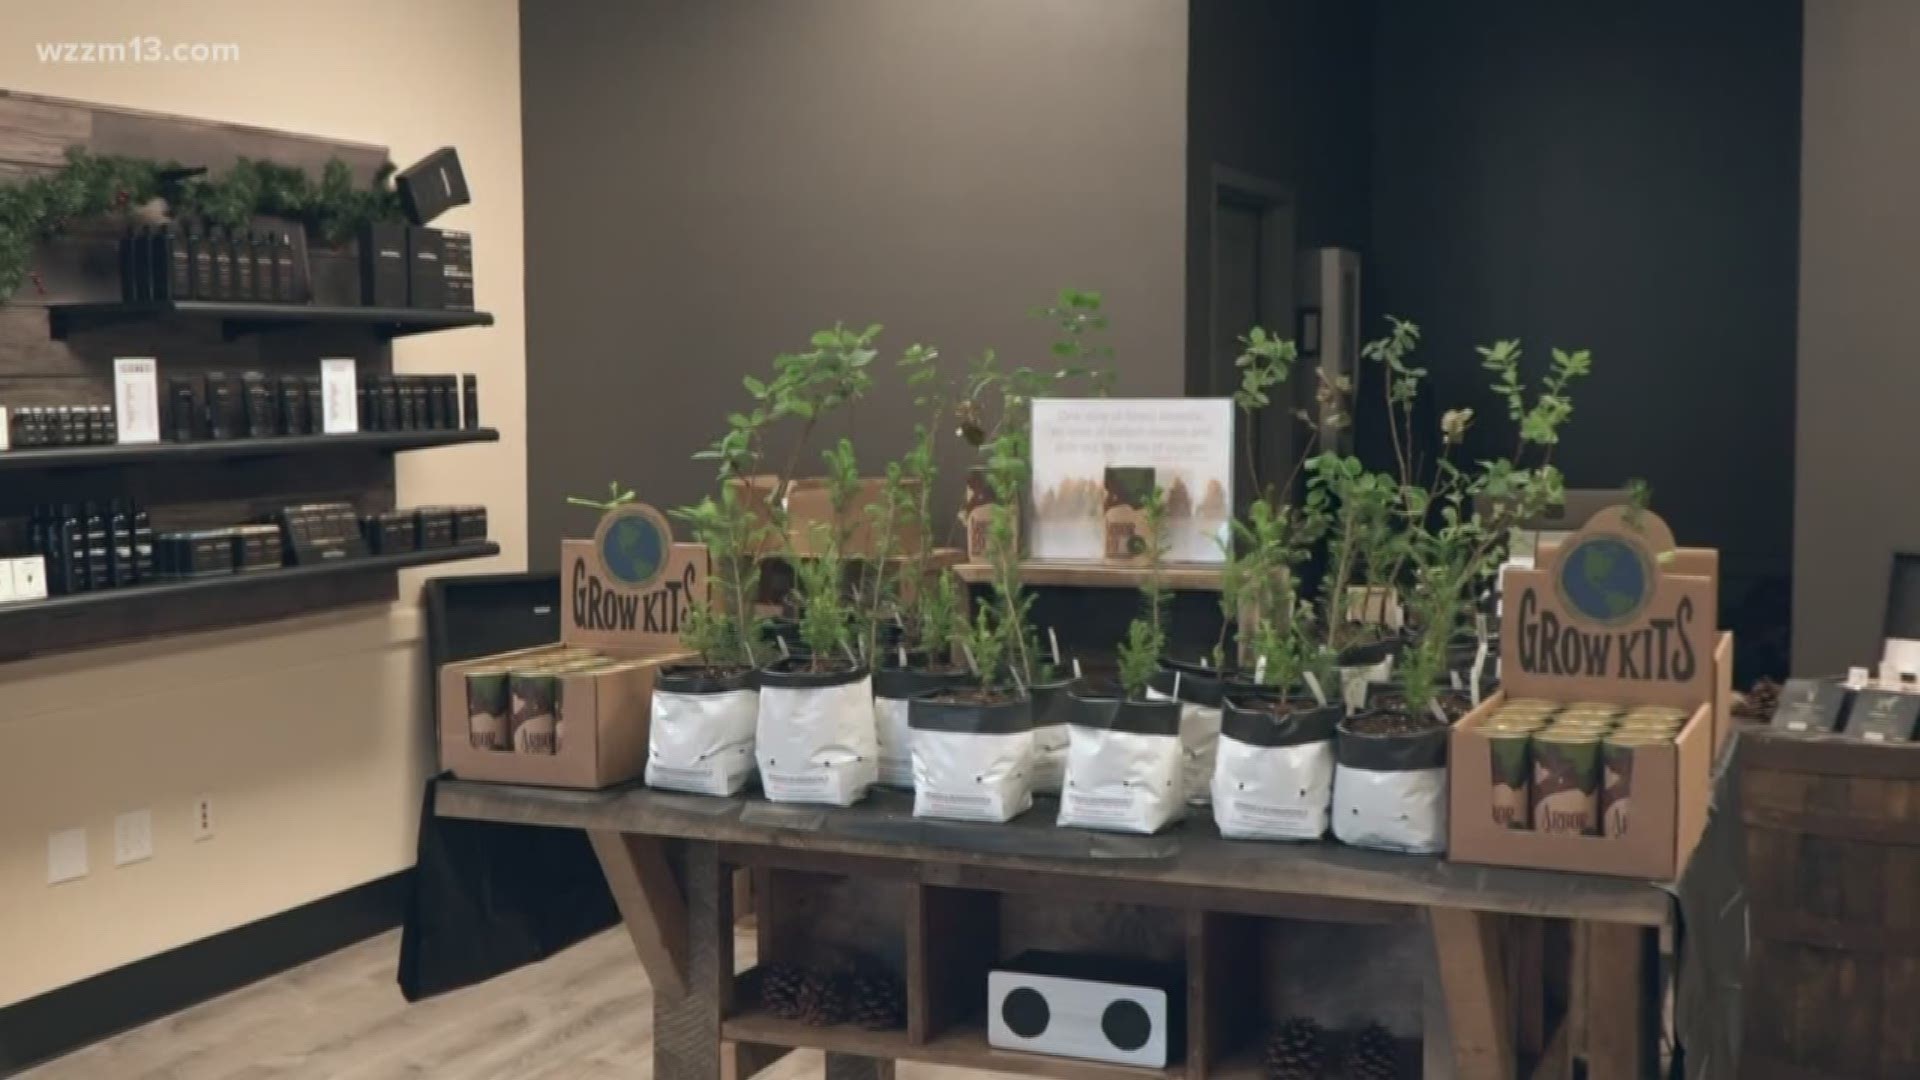 The Nine's Gentleman's Shoppe is giving away a sapling or growing kit with every purchase starting Monday. The store will have a variety of oak, maple and sequoia trees.